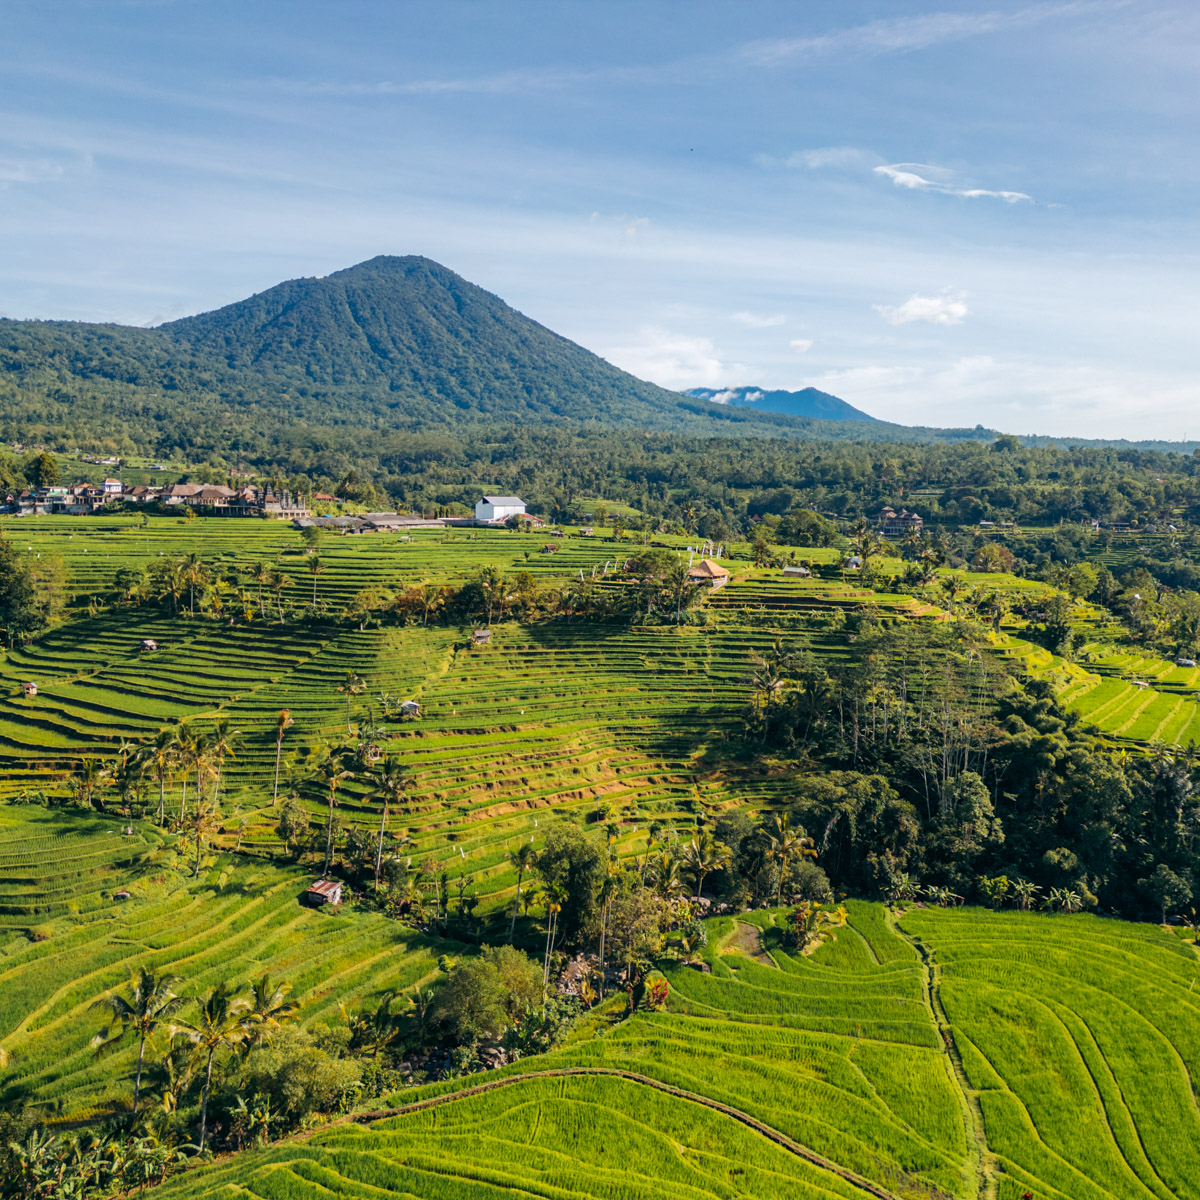 An aerial view of Jatiluwih Rice Terraces, showcasing the intricate network of rice paddies and the majestic Mount Batukaru in the background.